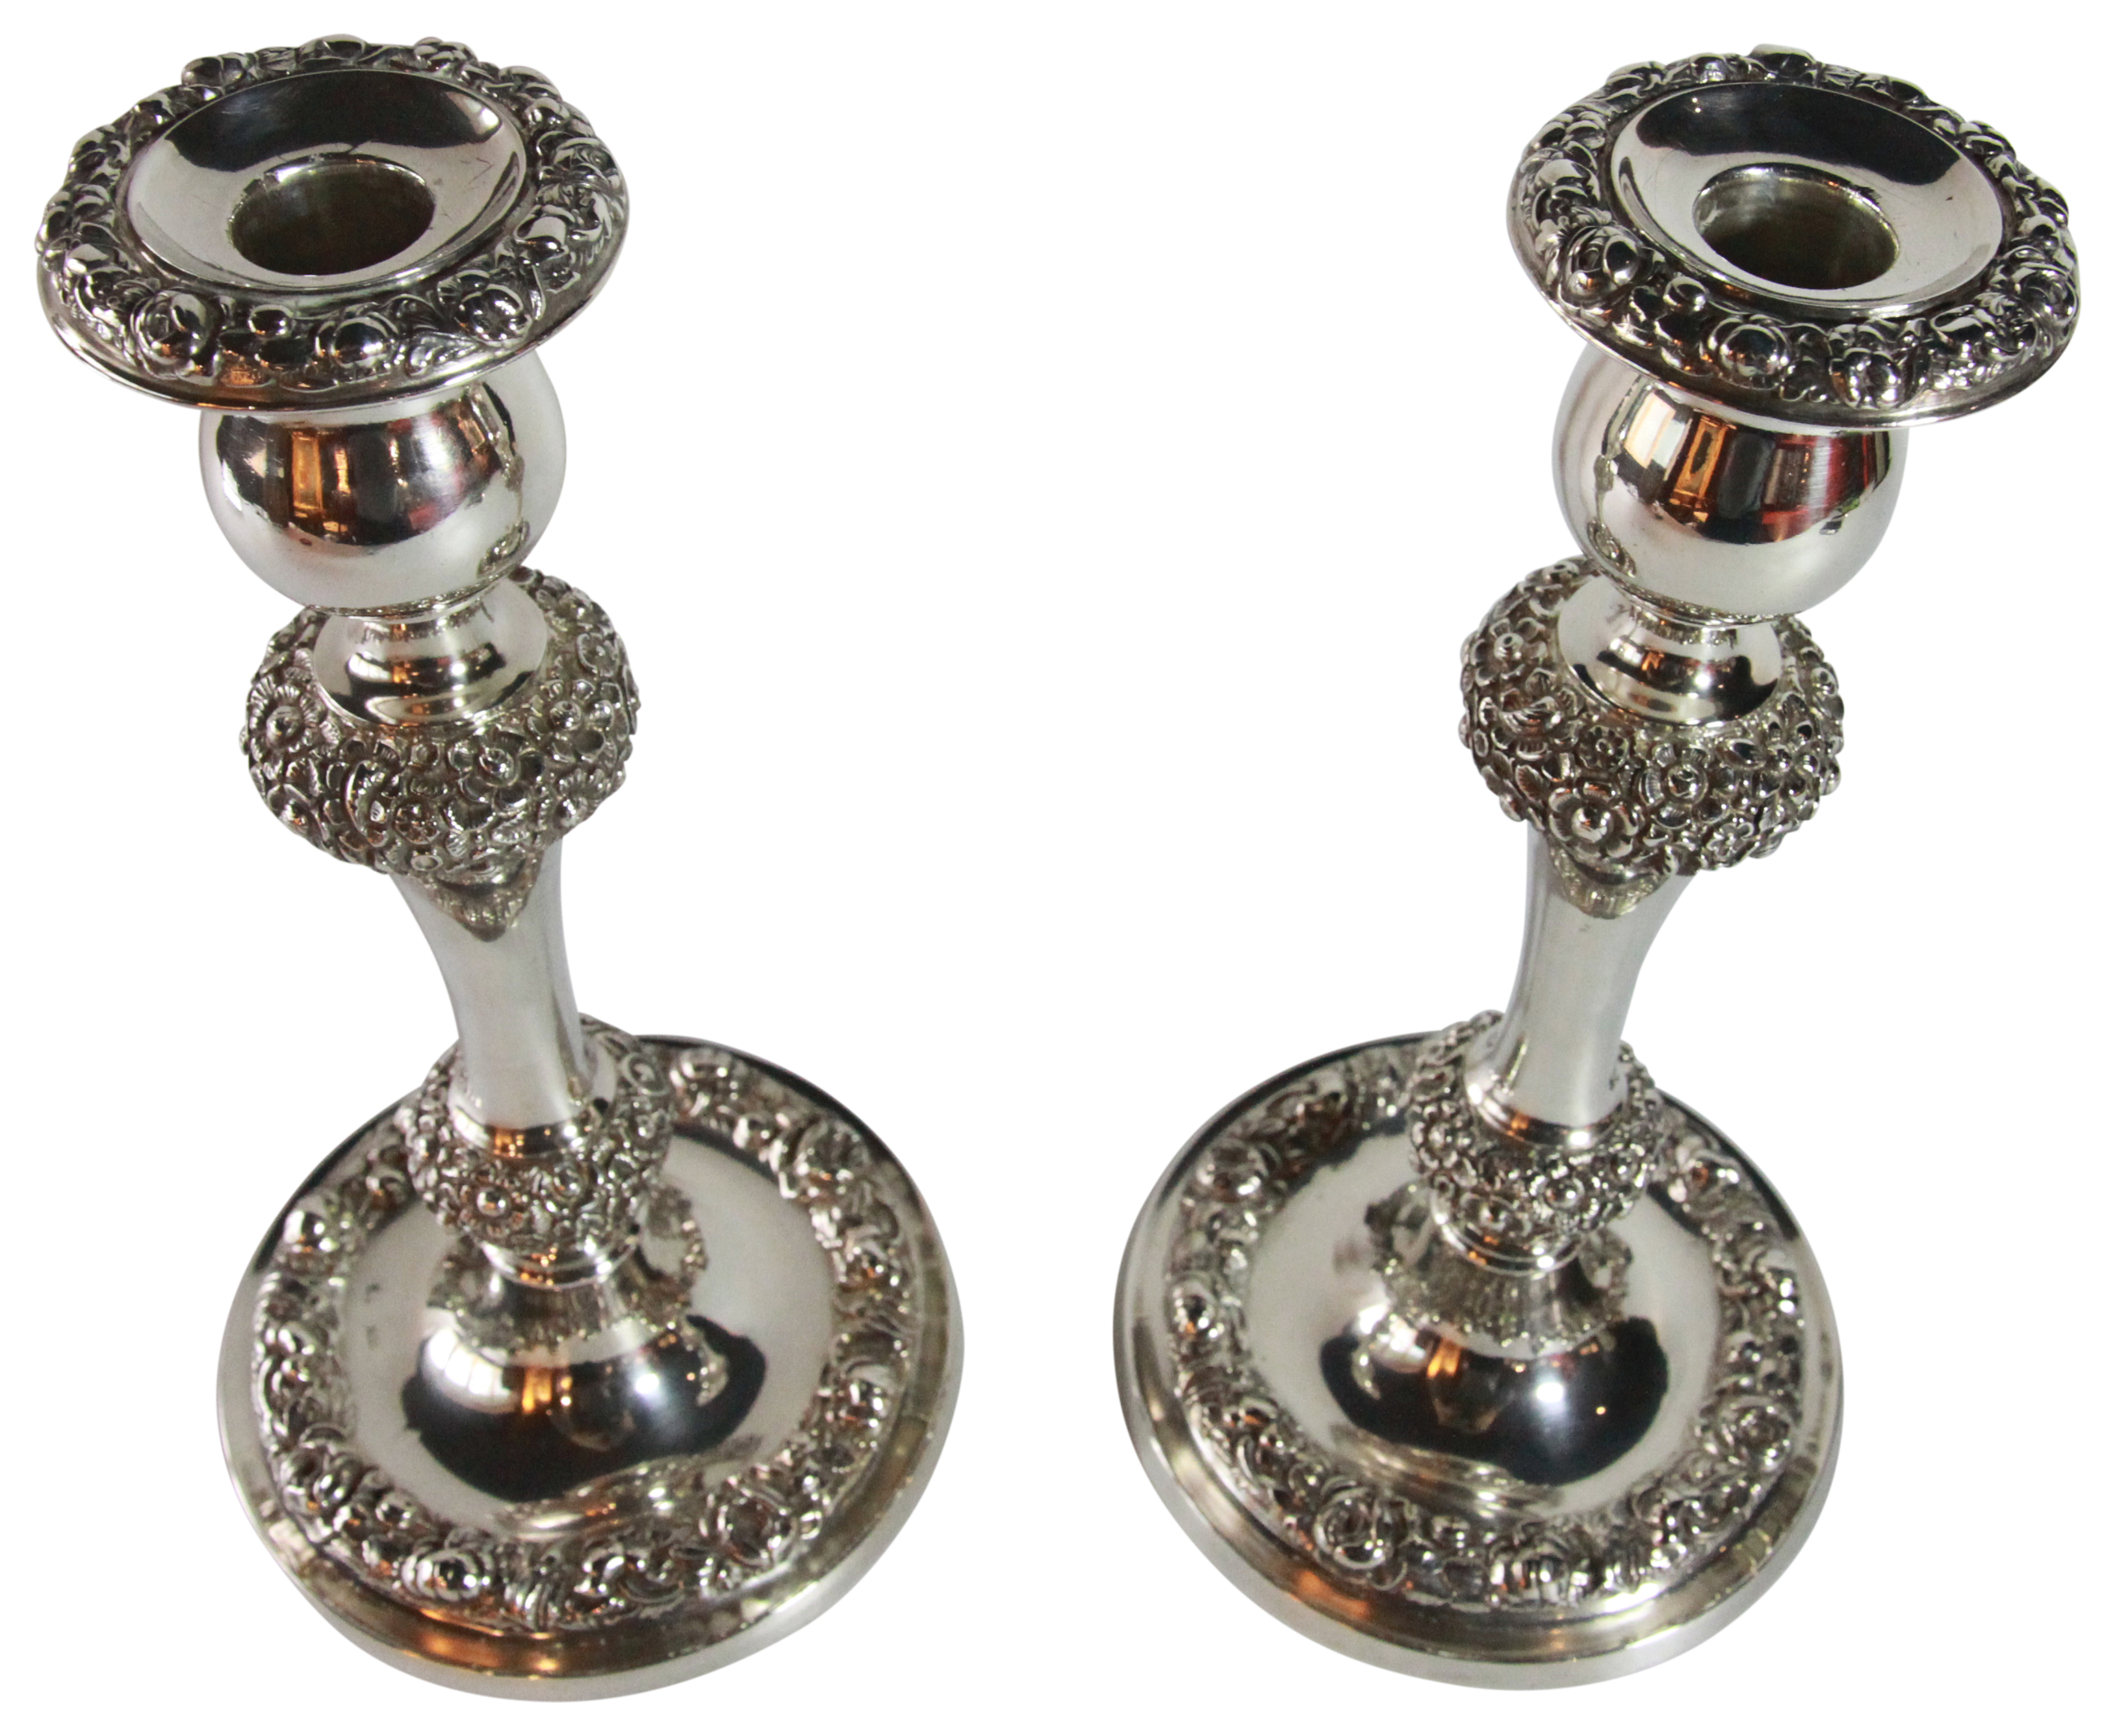 A pair of German Silver rounded candlesticks with stylized floral decoration - circa 1838 - (H: - Image 3 of 5